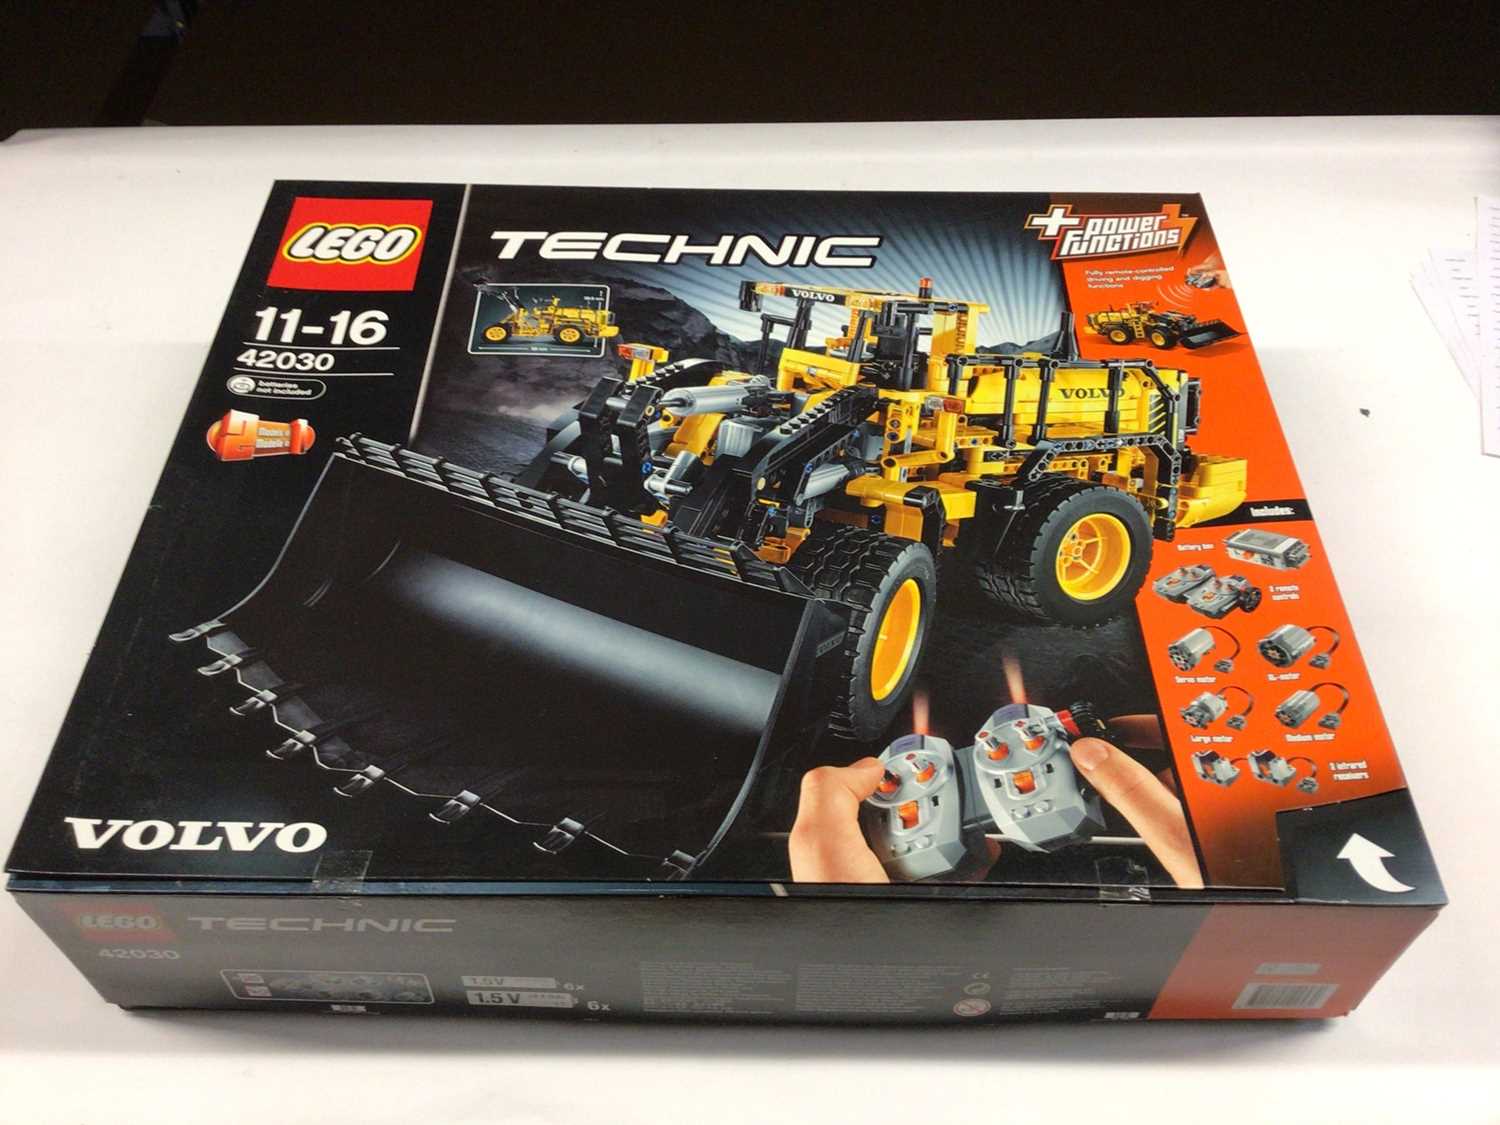 Lot 49 - Lego Technic 42030 Volvo Wheel Loader with